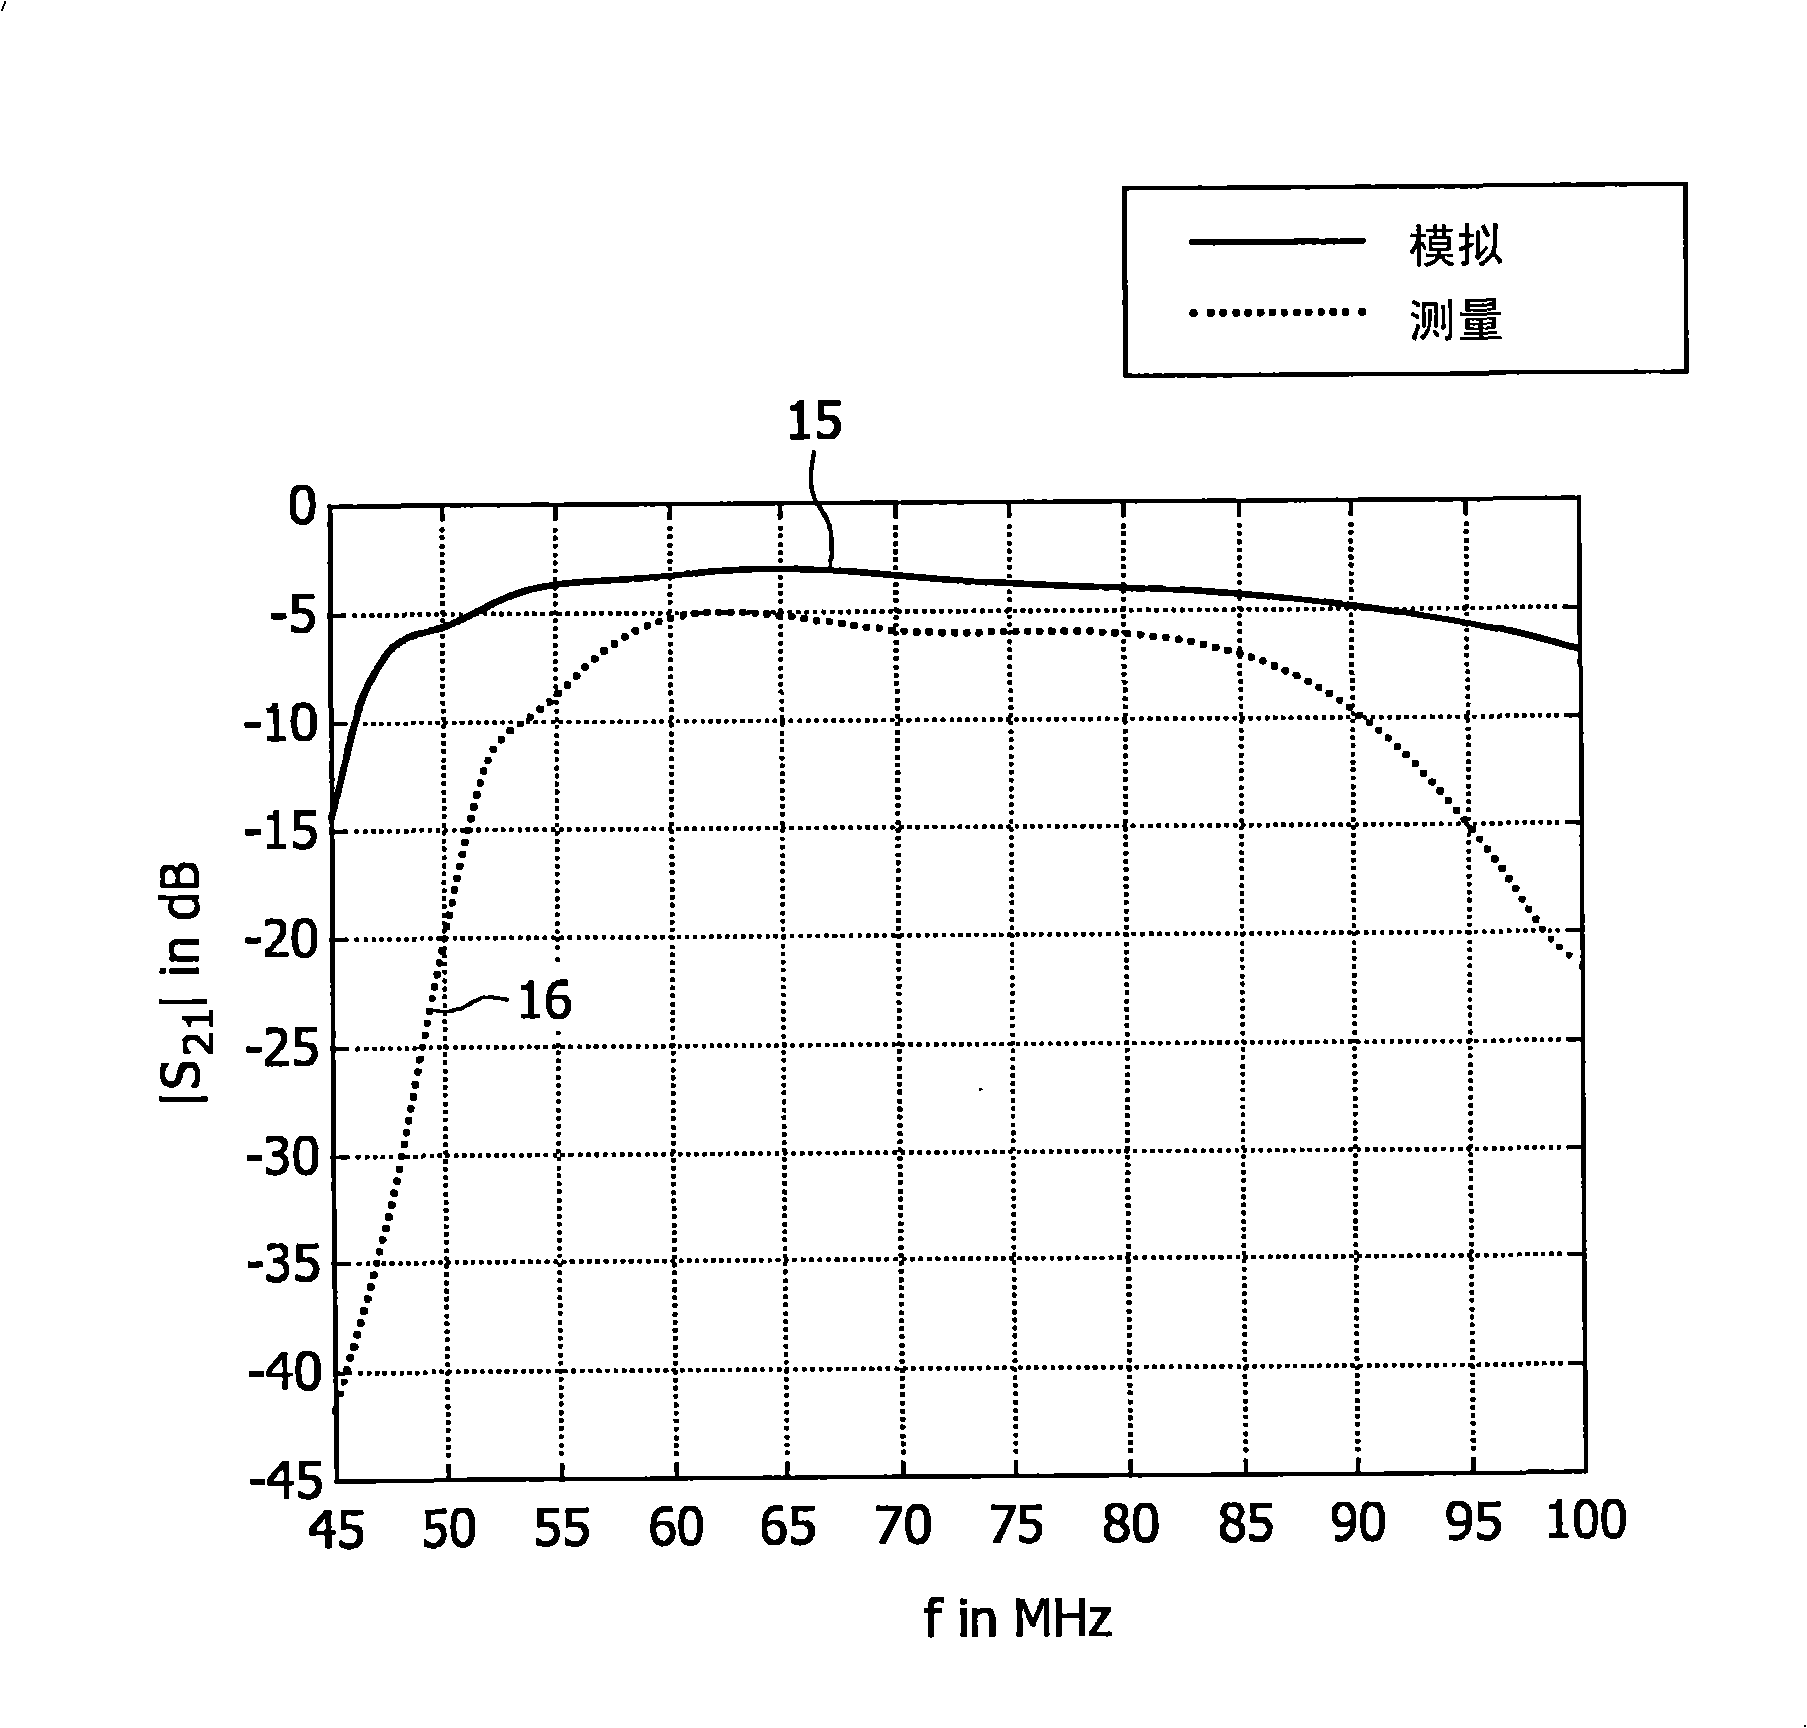 Tunable and/or detunable mr receive coil arrangements